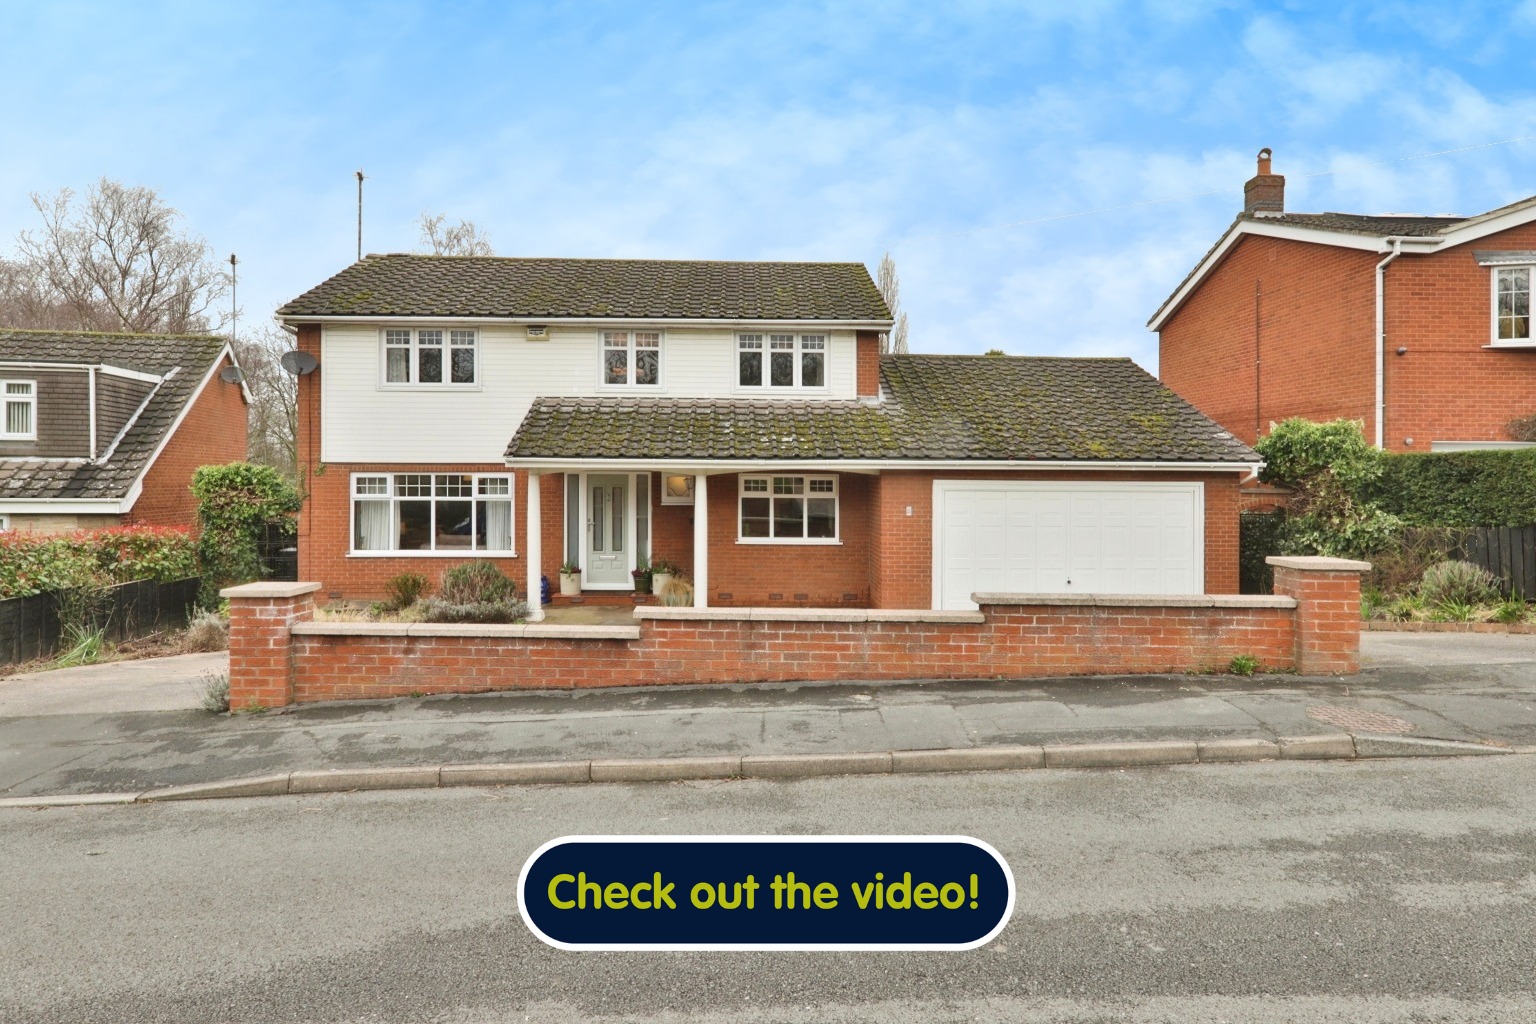 4 bed detached house for sale in Park View, Barton upon Humber  - Property Image 1